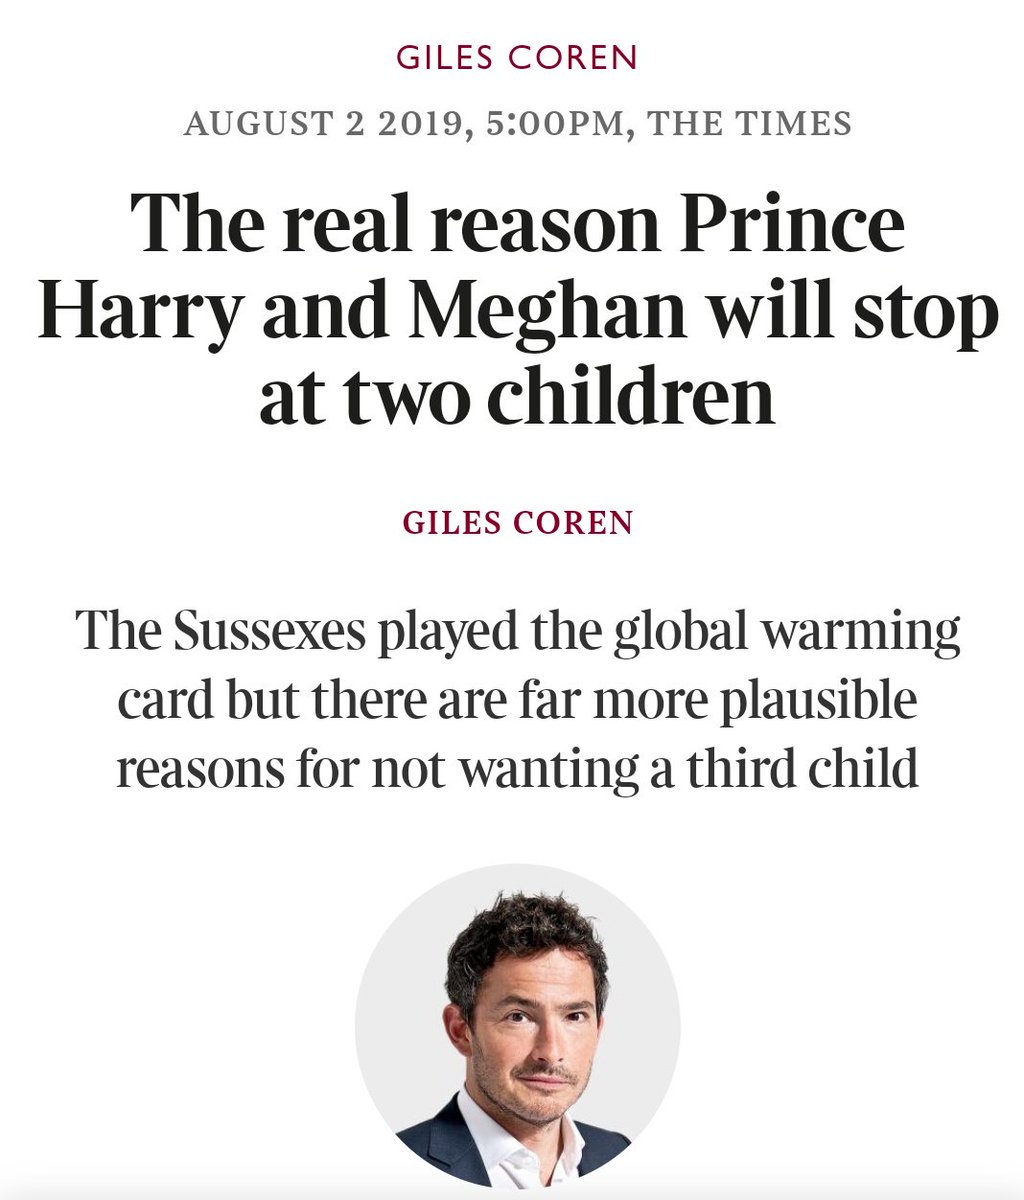 Giles Coren just can't help himself. Now the racist suggestion that Harry would, on behalf of his mixed race wife, Meghan Markle, see a PRIMATOLOGIST about family planning. How did an editor ever let this through?  https://www.thetimes.co.uk/edition/comment/the-real-reason-harry-and-meghan-duke-duchess-sussex-will-stop-at-two-children-archie-38722f3nd